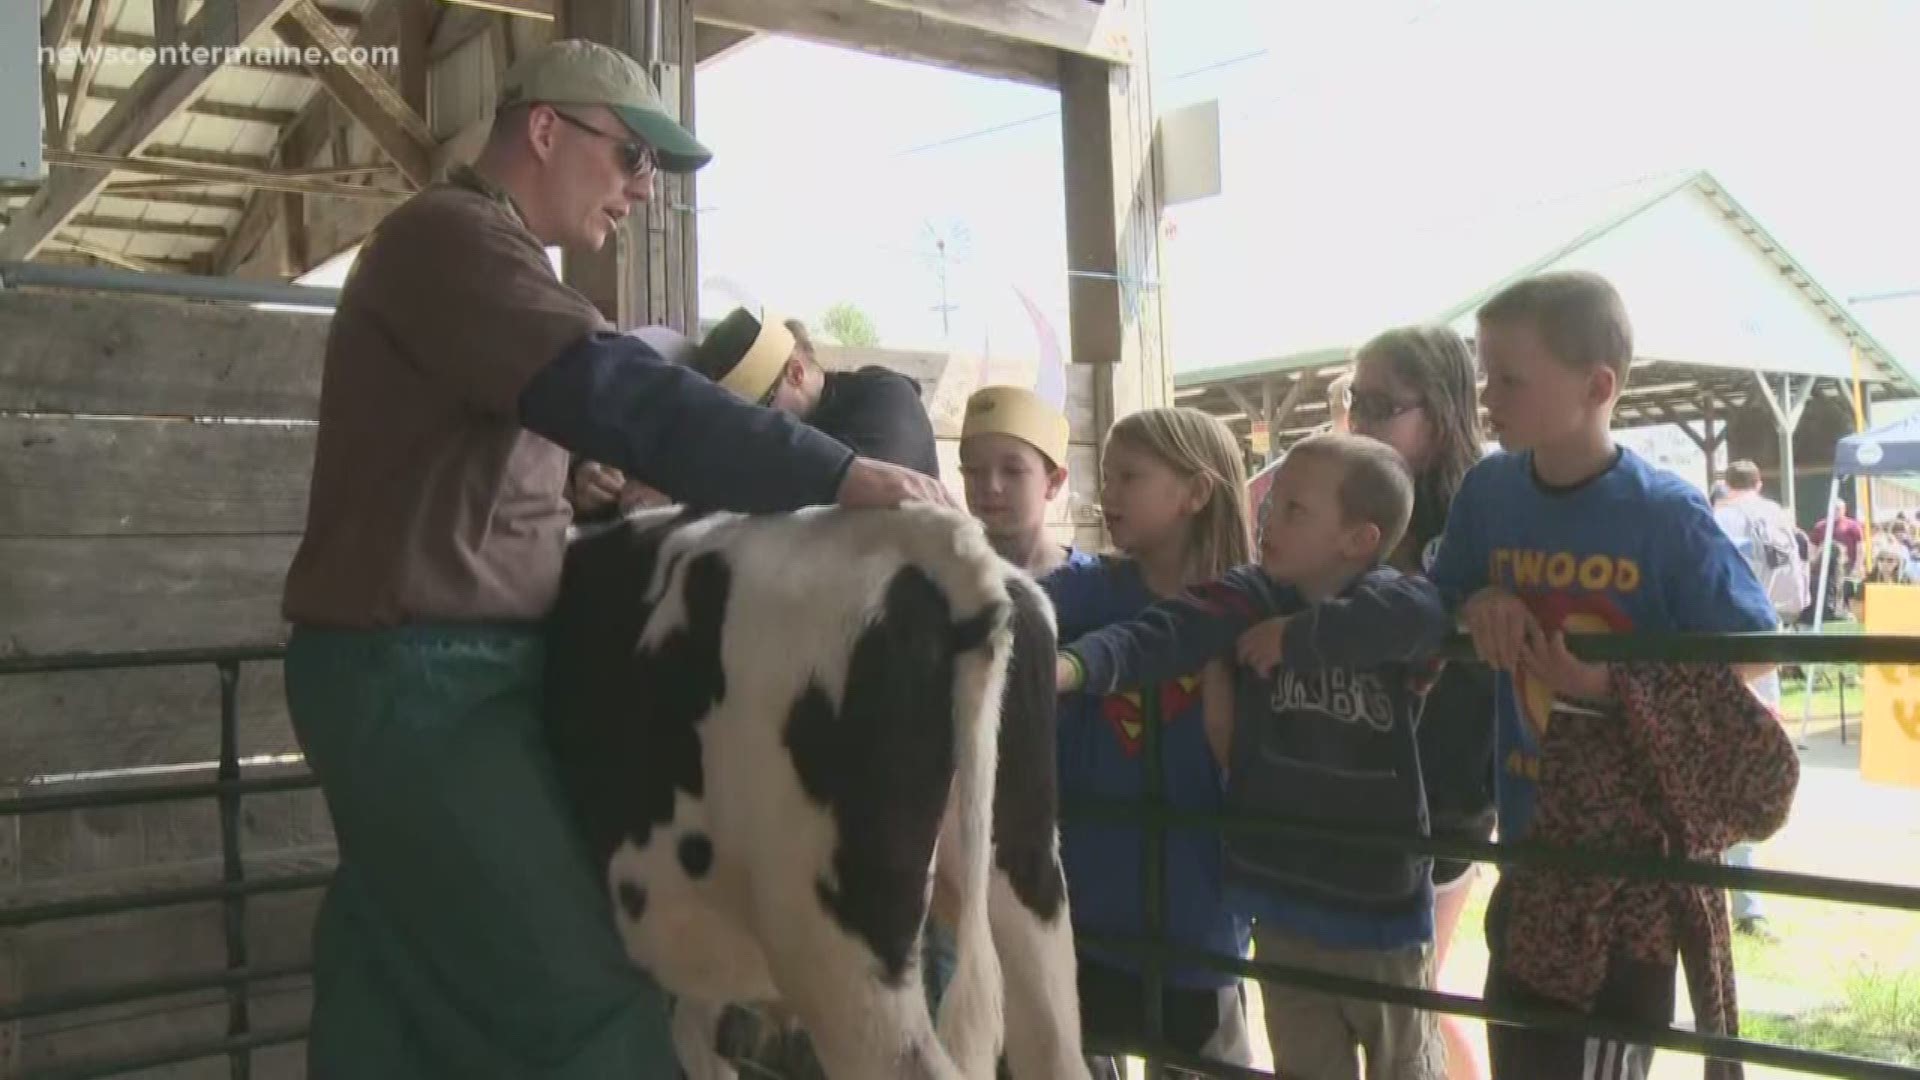 The livestock expo at Windsor Fair teaches children about the value of farms and food production in Maine.